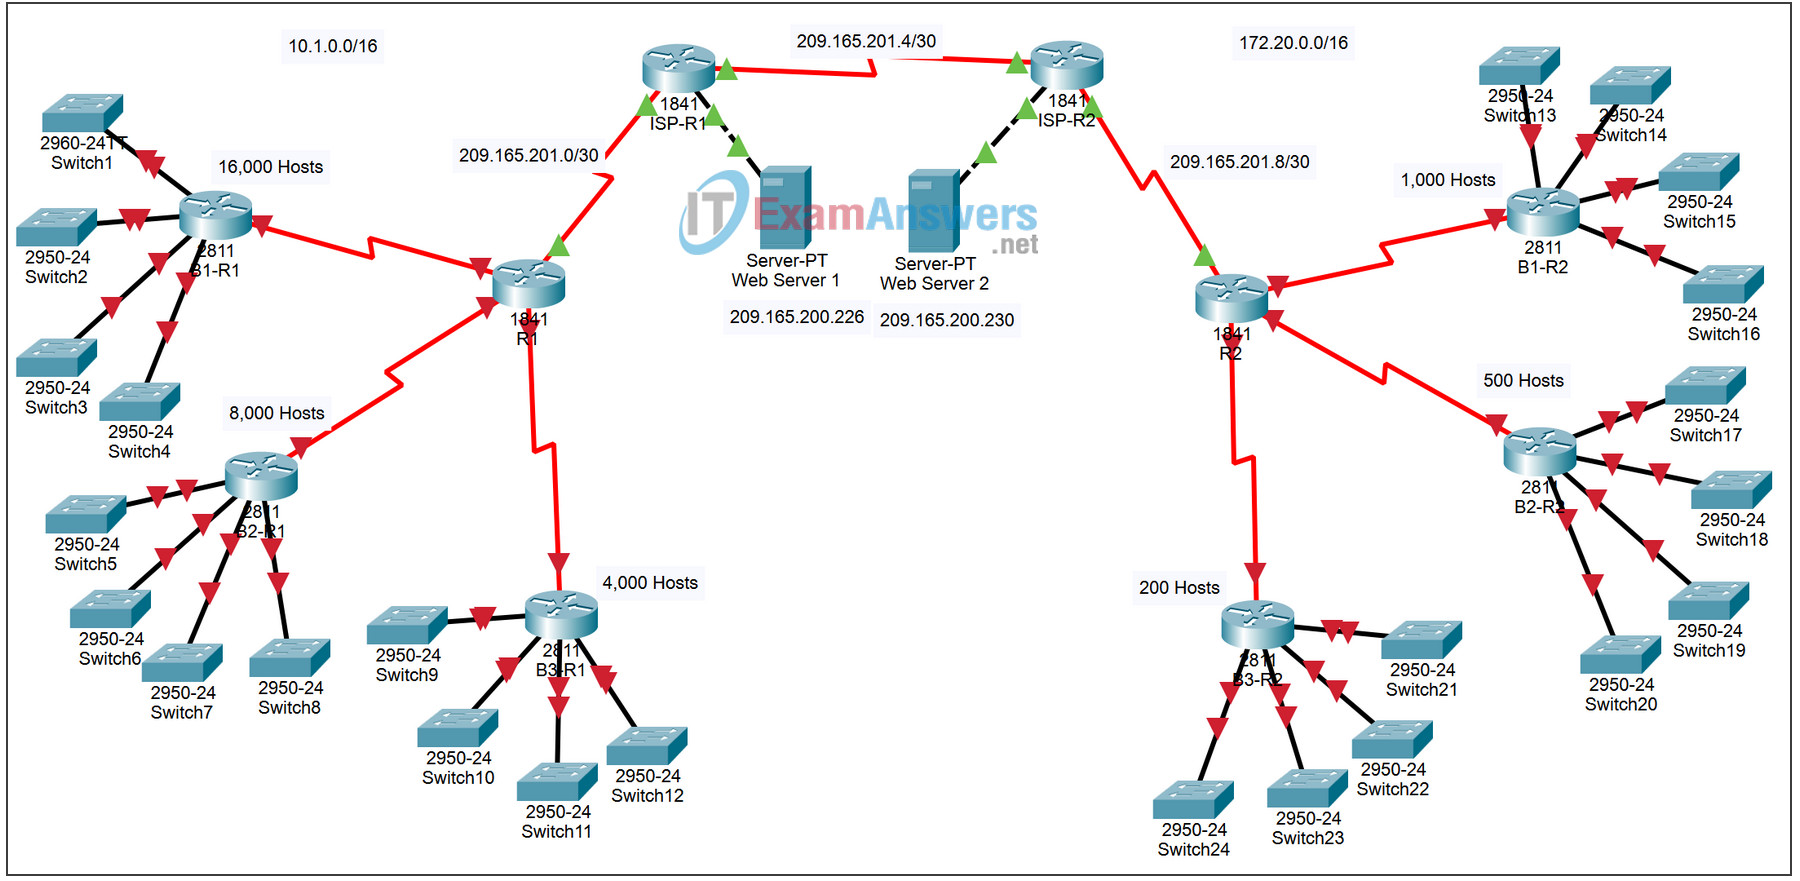 8.5.1 Packet Tracer - Skills Integration Challenge Answers 2